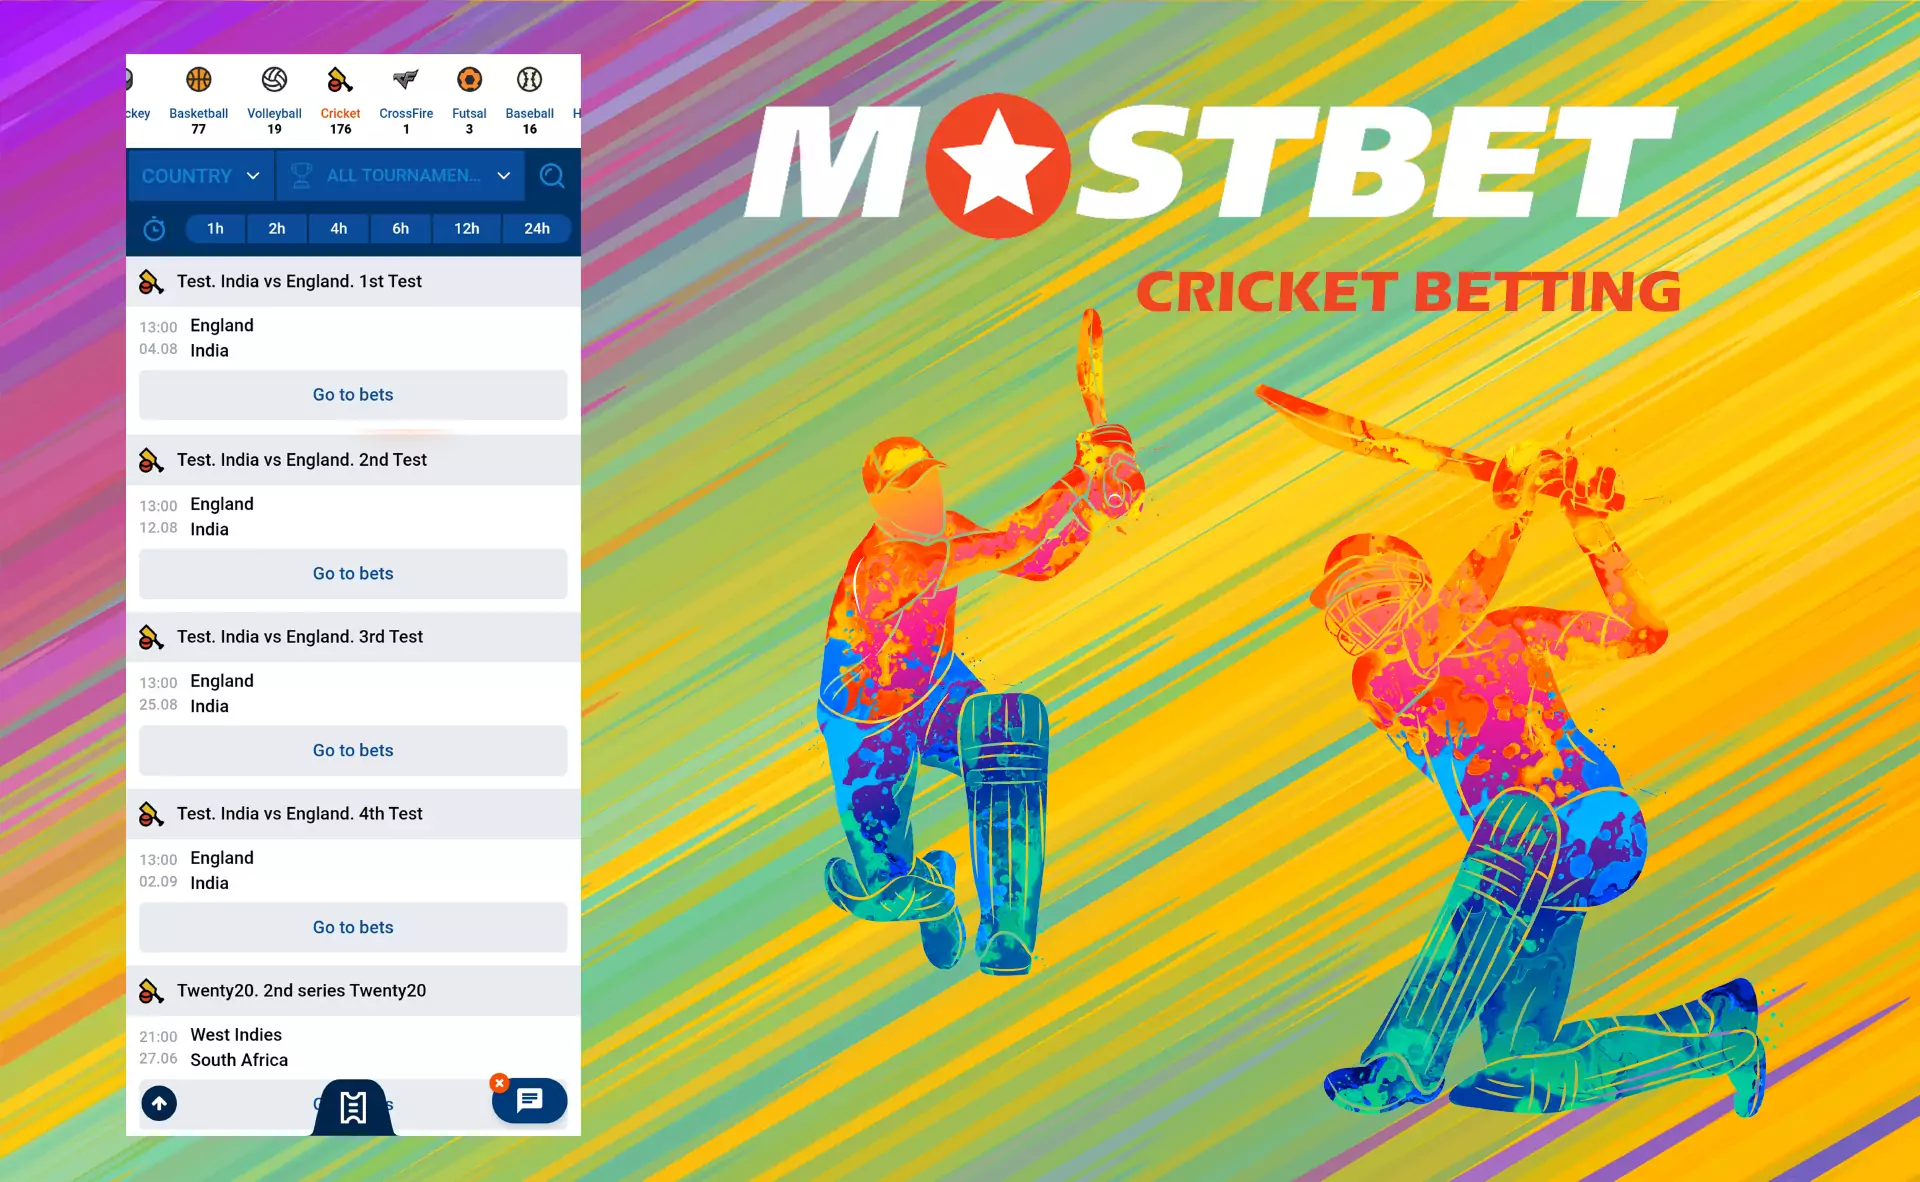 Cricket fans can place bets in the Mostbet app.